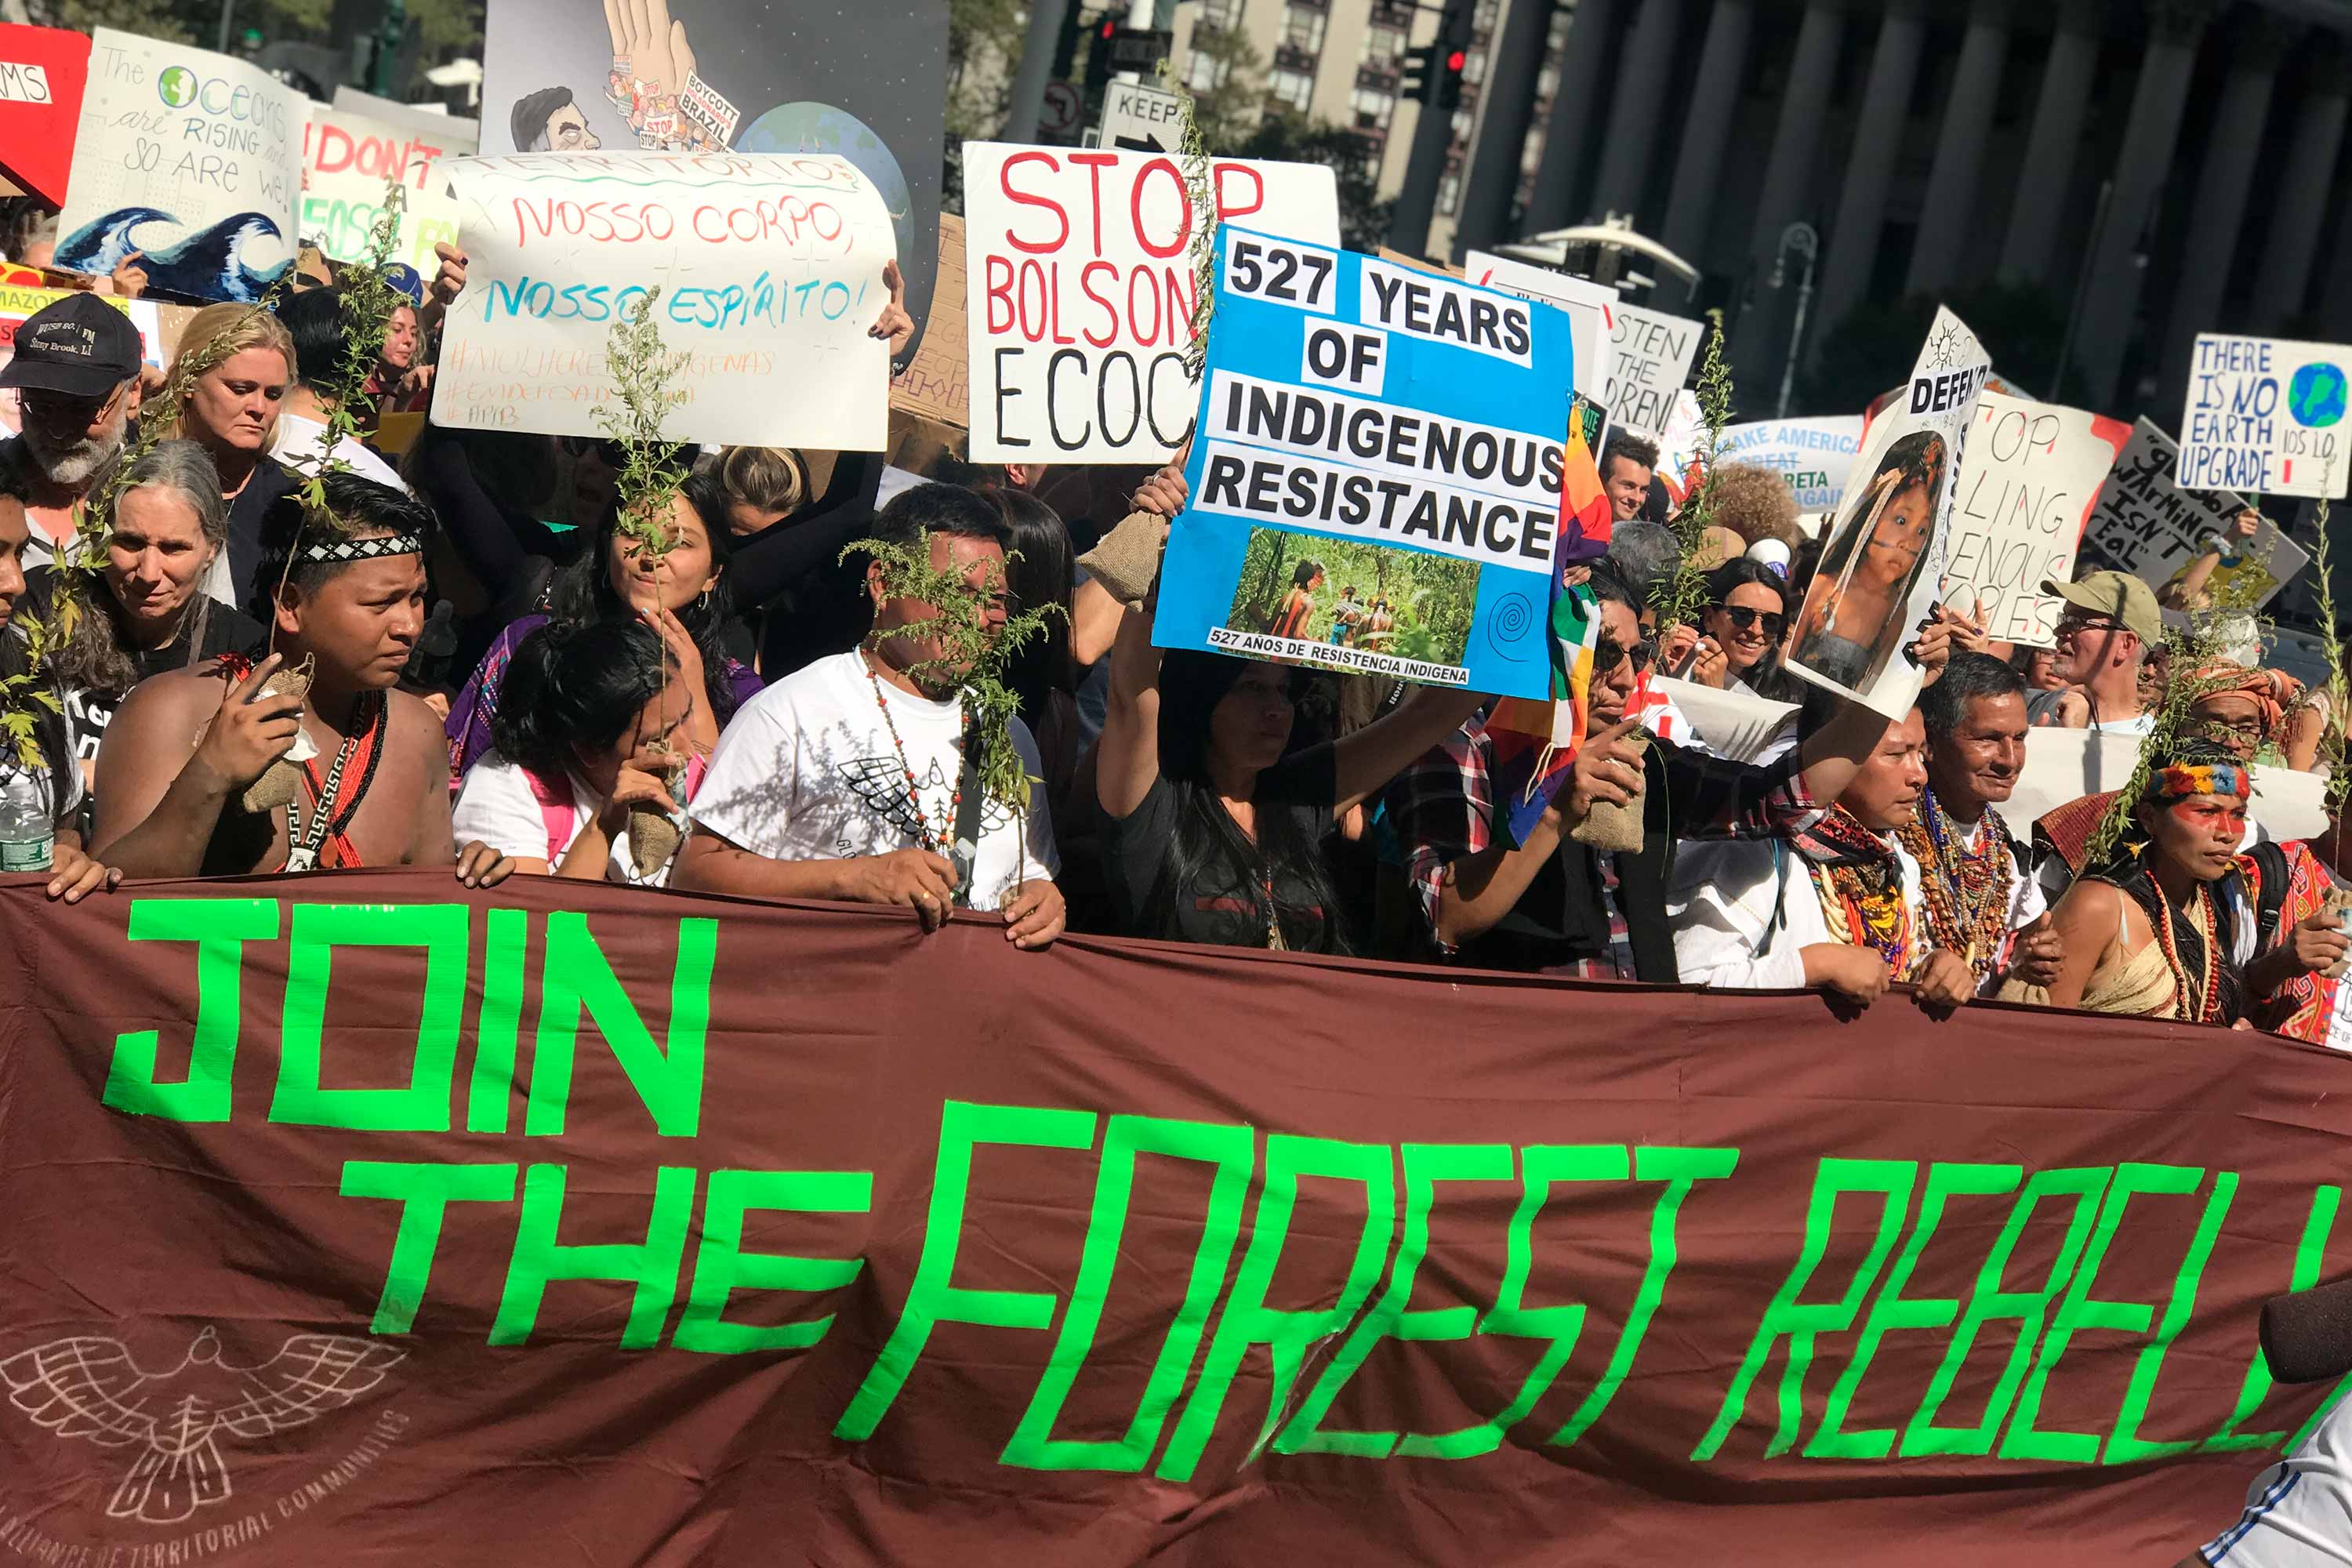 A group of indigenous leaders holds a large brown textile with text “Join the forest rebellion” while marching down NYC during Climate Week 2019